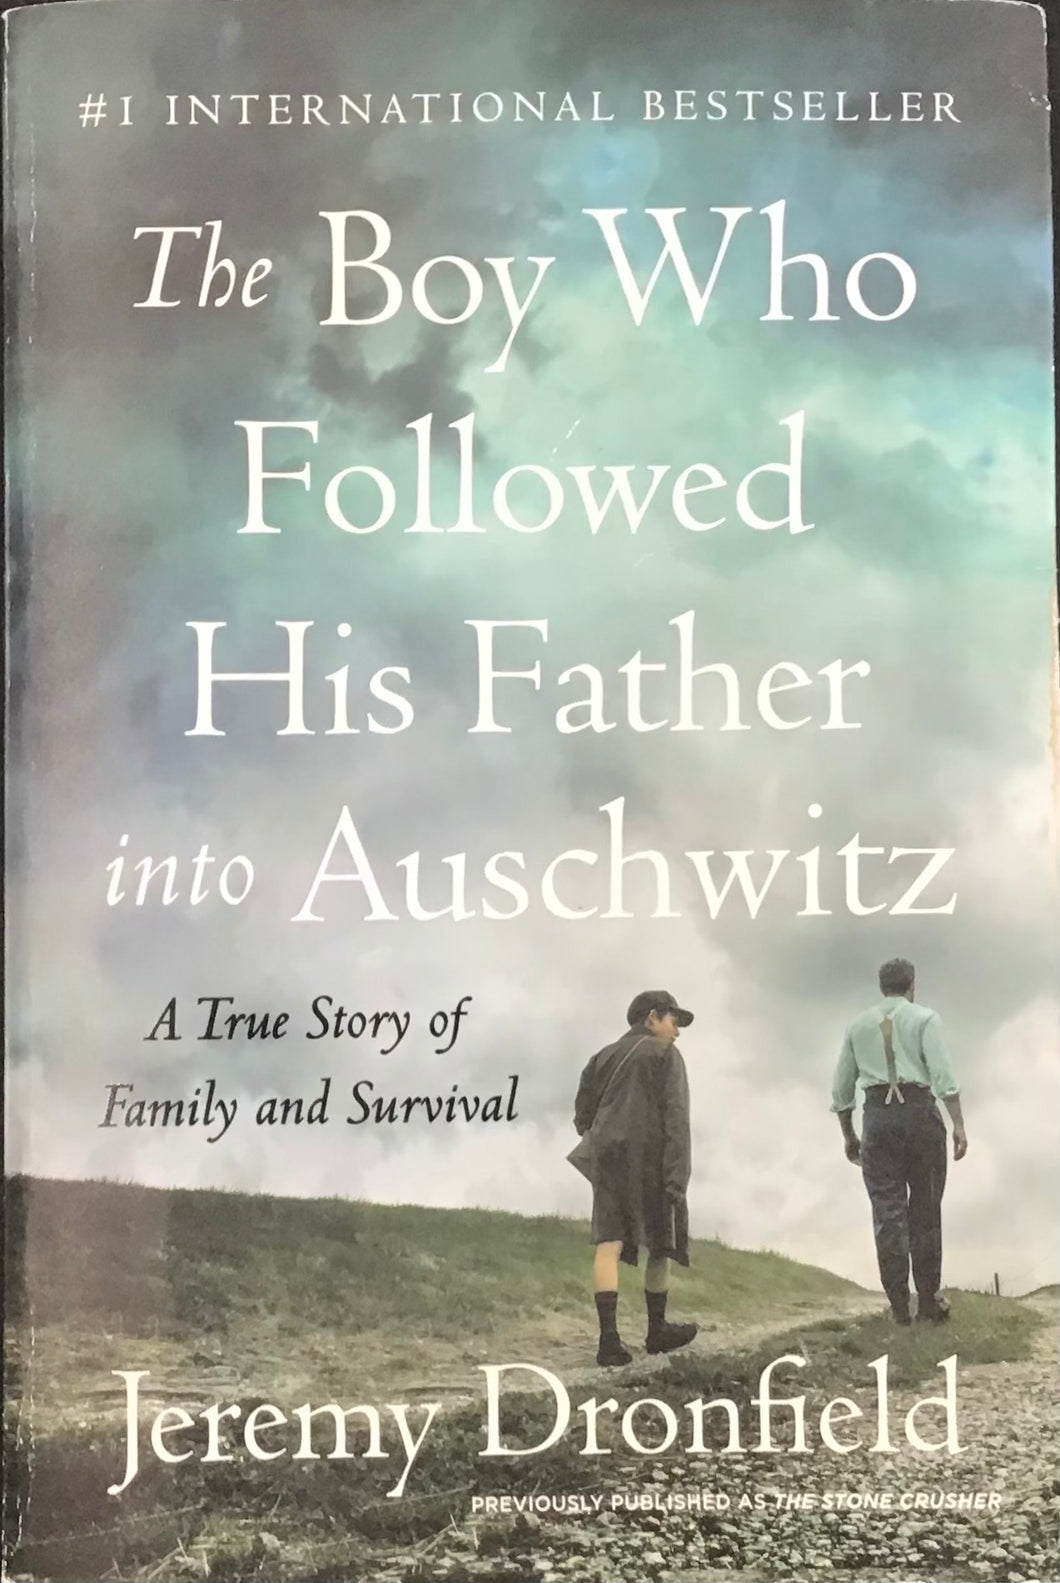 The Boy Who Followed His Father Into Auschwitz, Jeremy Dronfield